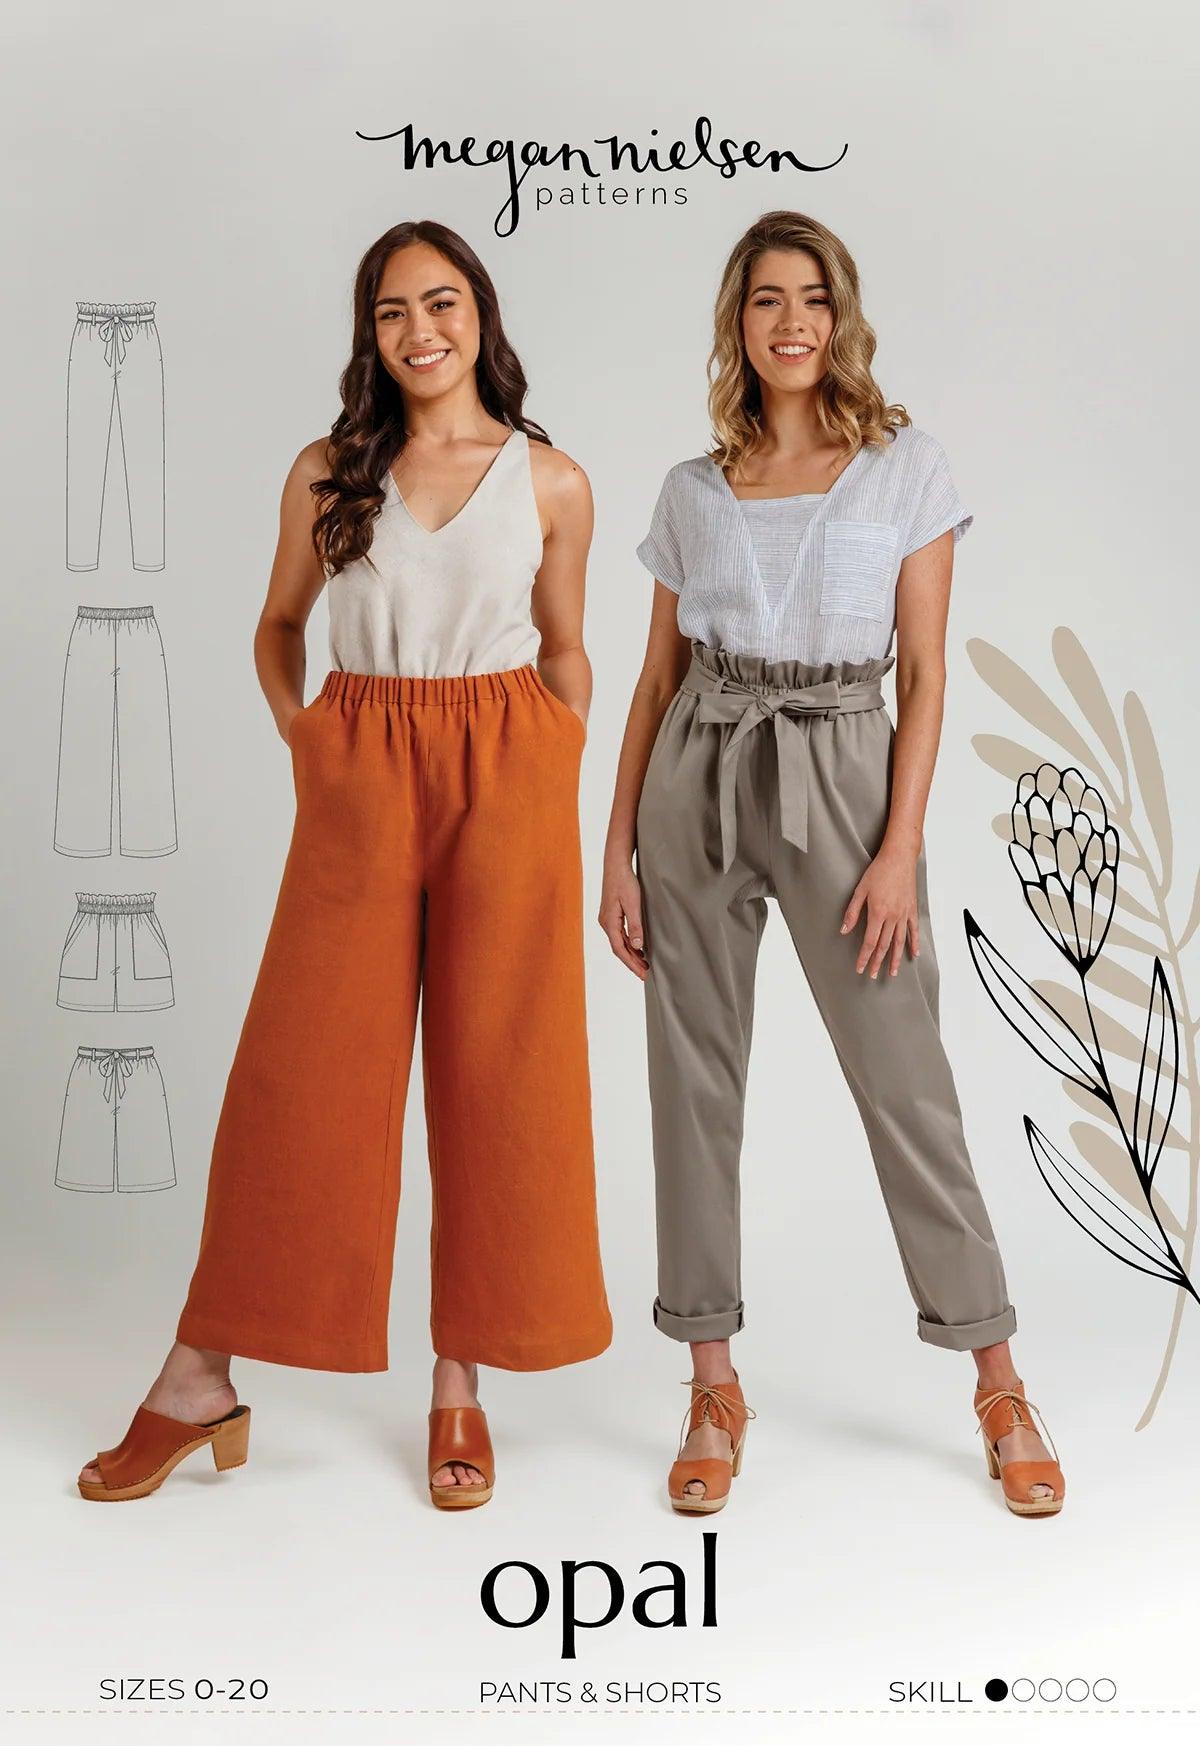 Megan Nielsen Opal Pants and Shorts Paper Sewing Pattern Sizes 0 - 20